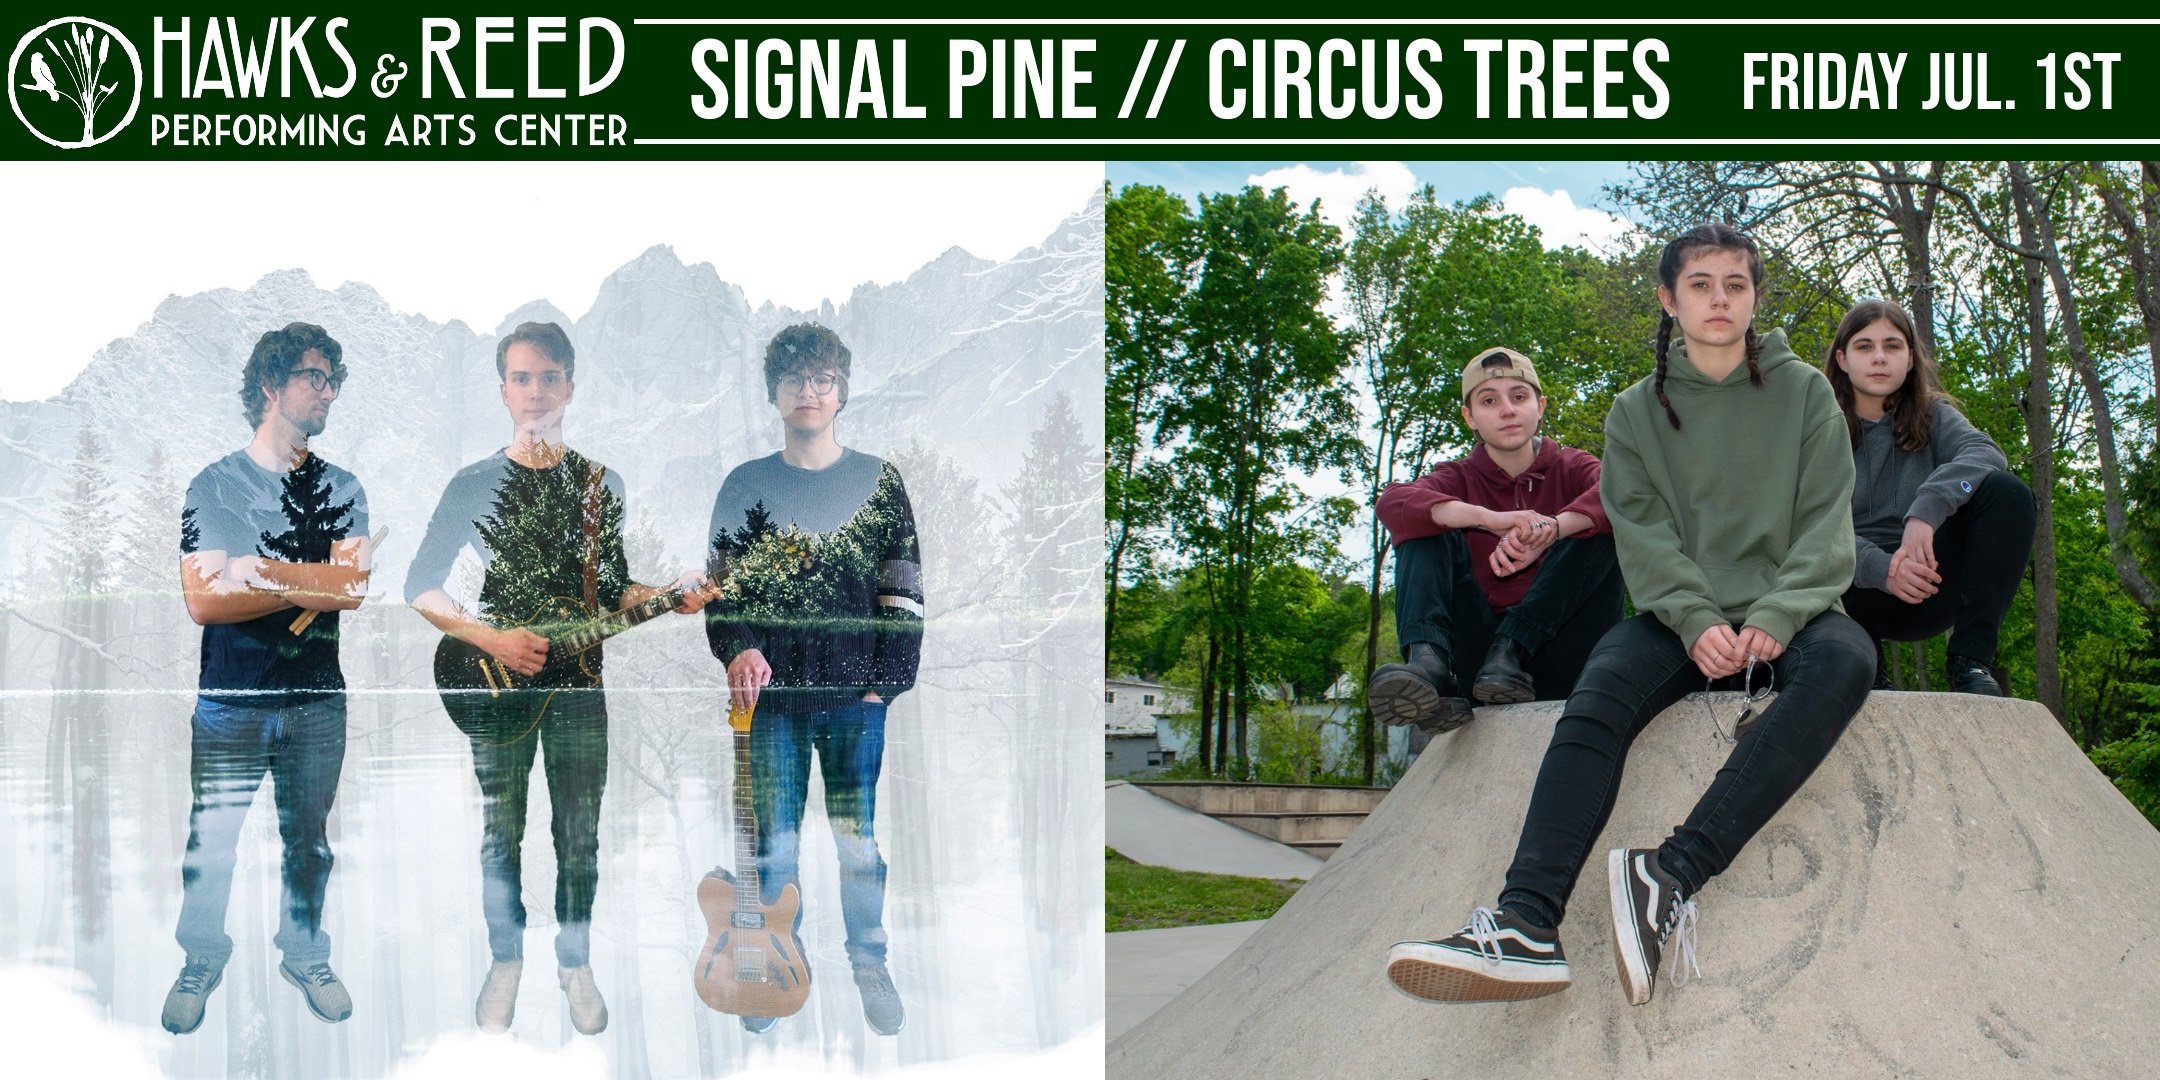 Circus Trees with Signal Pine at Hawks & Reed